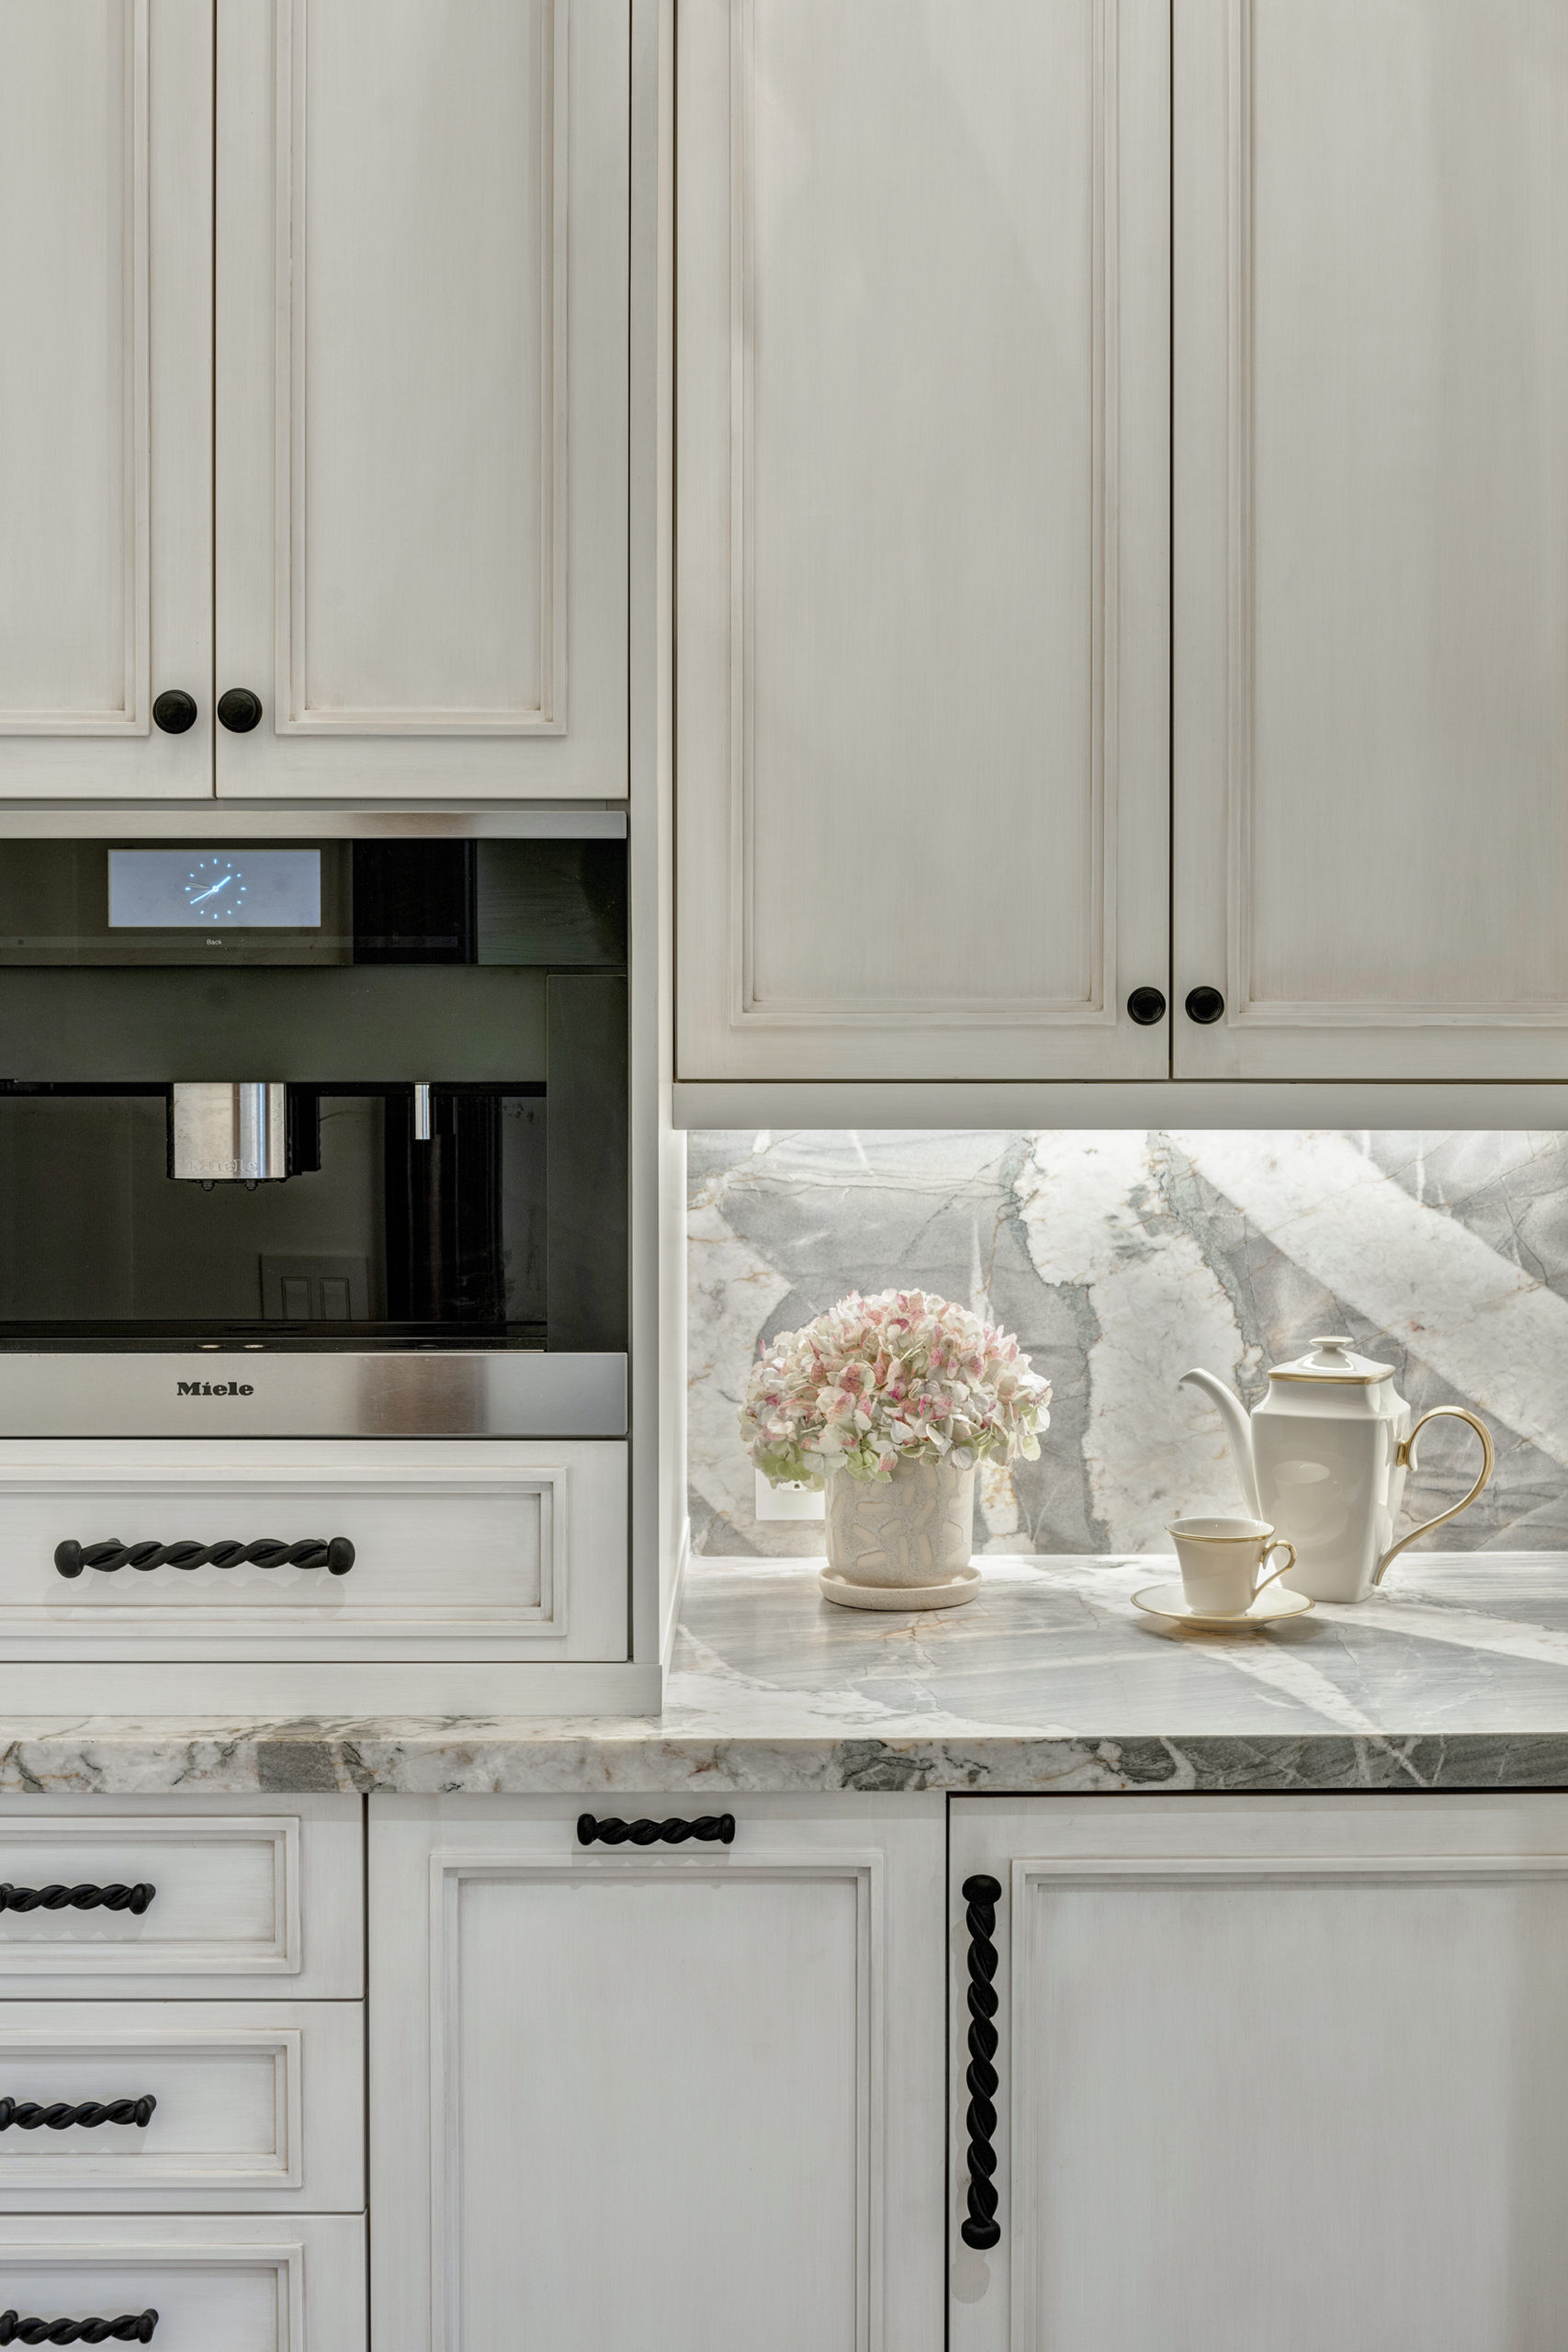 built-in coffee maker and refrigerator drawers